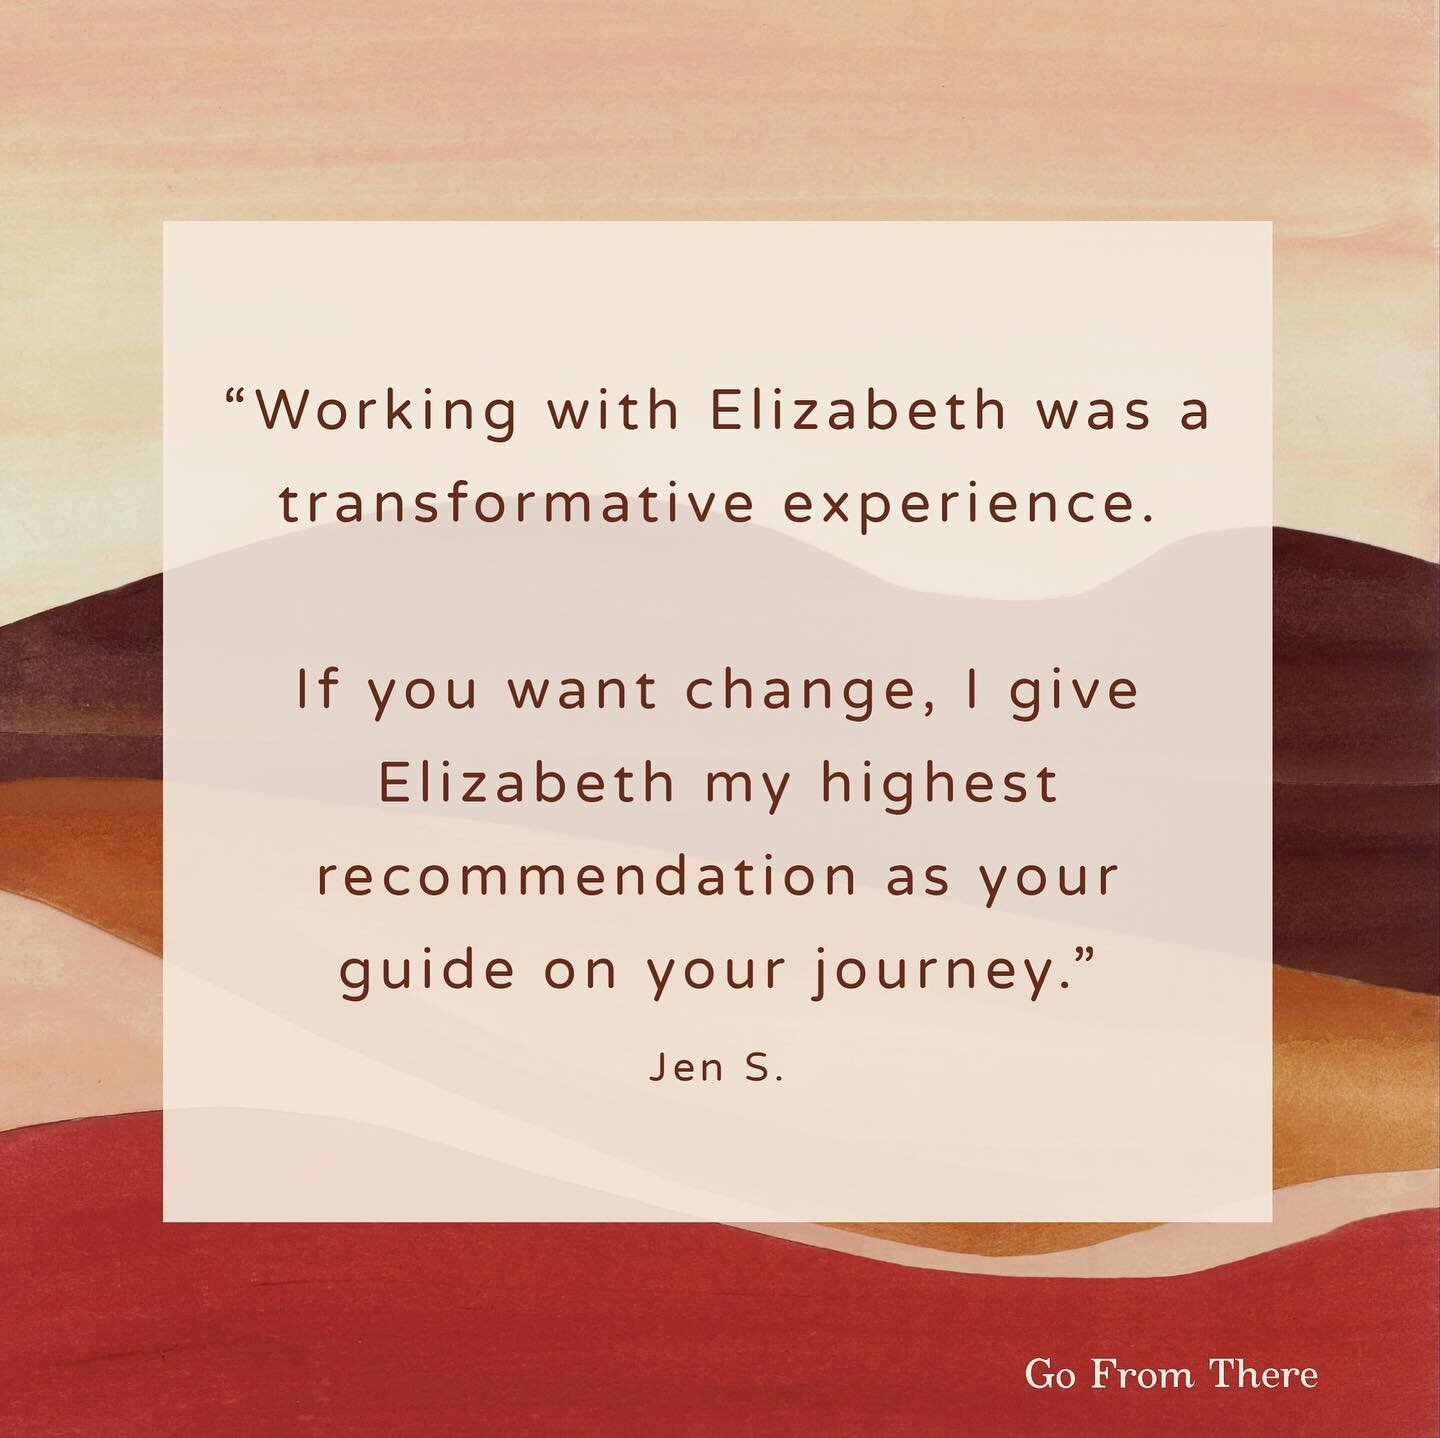 Curious what it&rsquo;s like to work with me? One of my Go From There coaching clients had this to say:

&ldquo;Working with Elizabeth was a transformative experience. She possesses warmth, strength, honesty, and vulnerability that invited a truly op